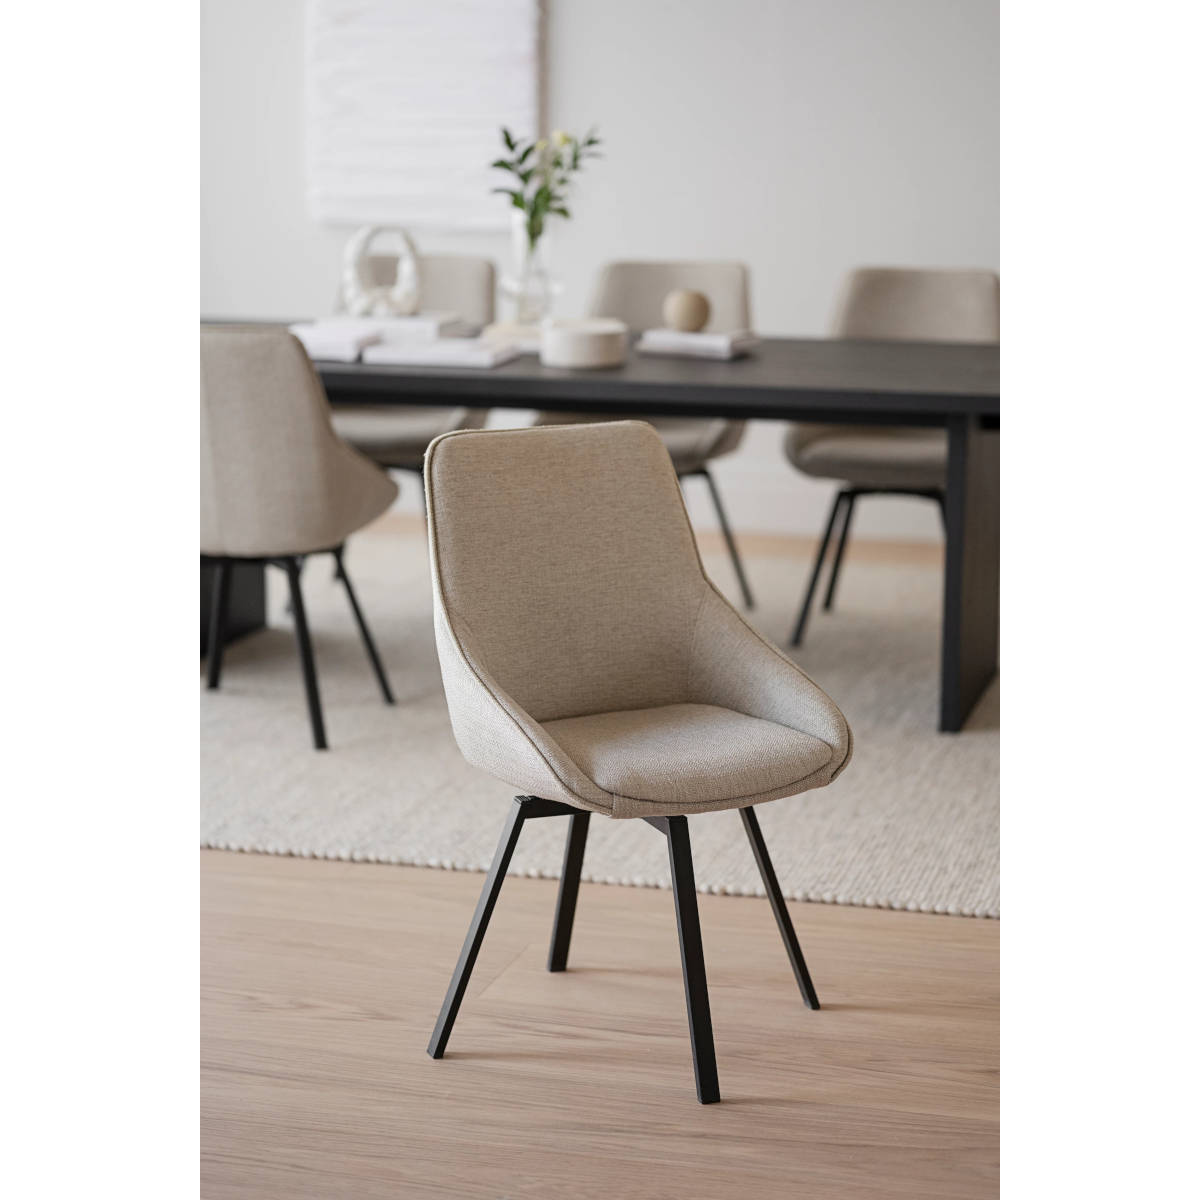 Liam dining chair